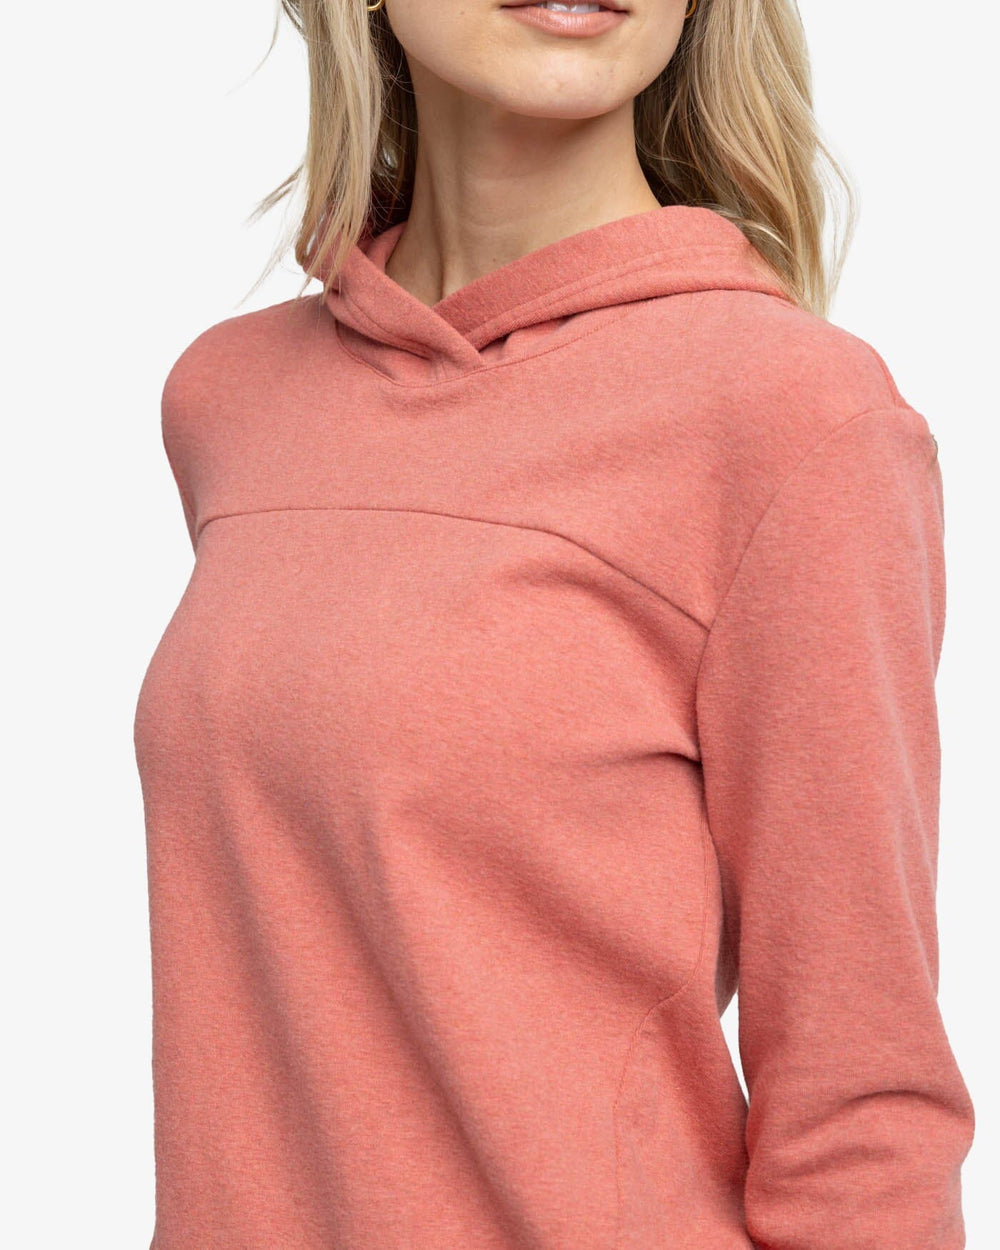 The detail view of the Southern Tide Stassi Hoodie by Southern Tide - Heather Dusty Coral